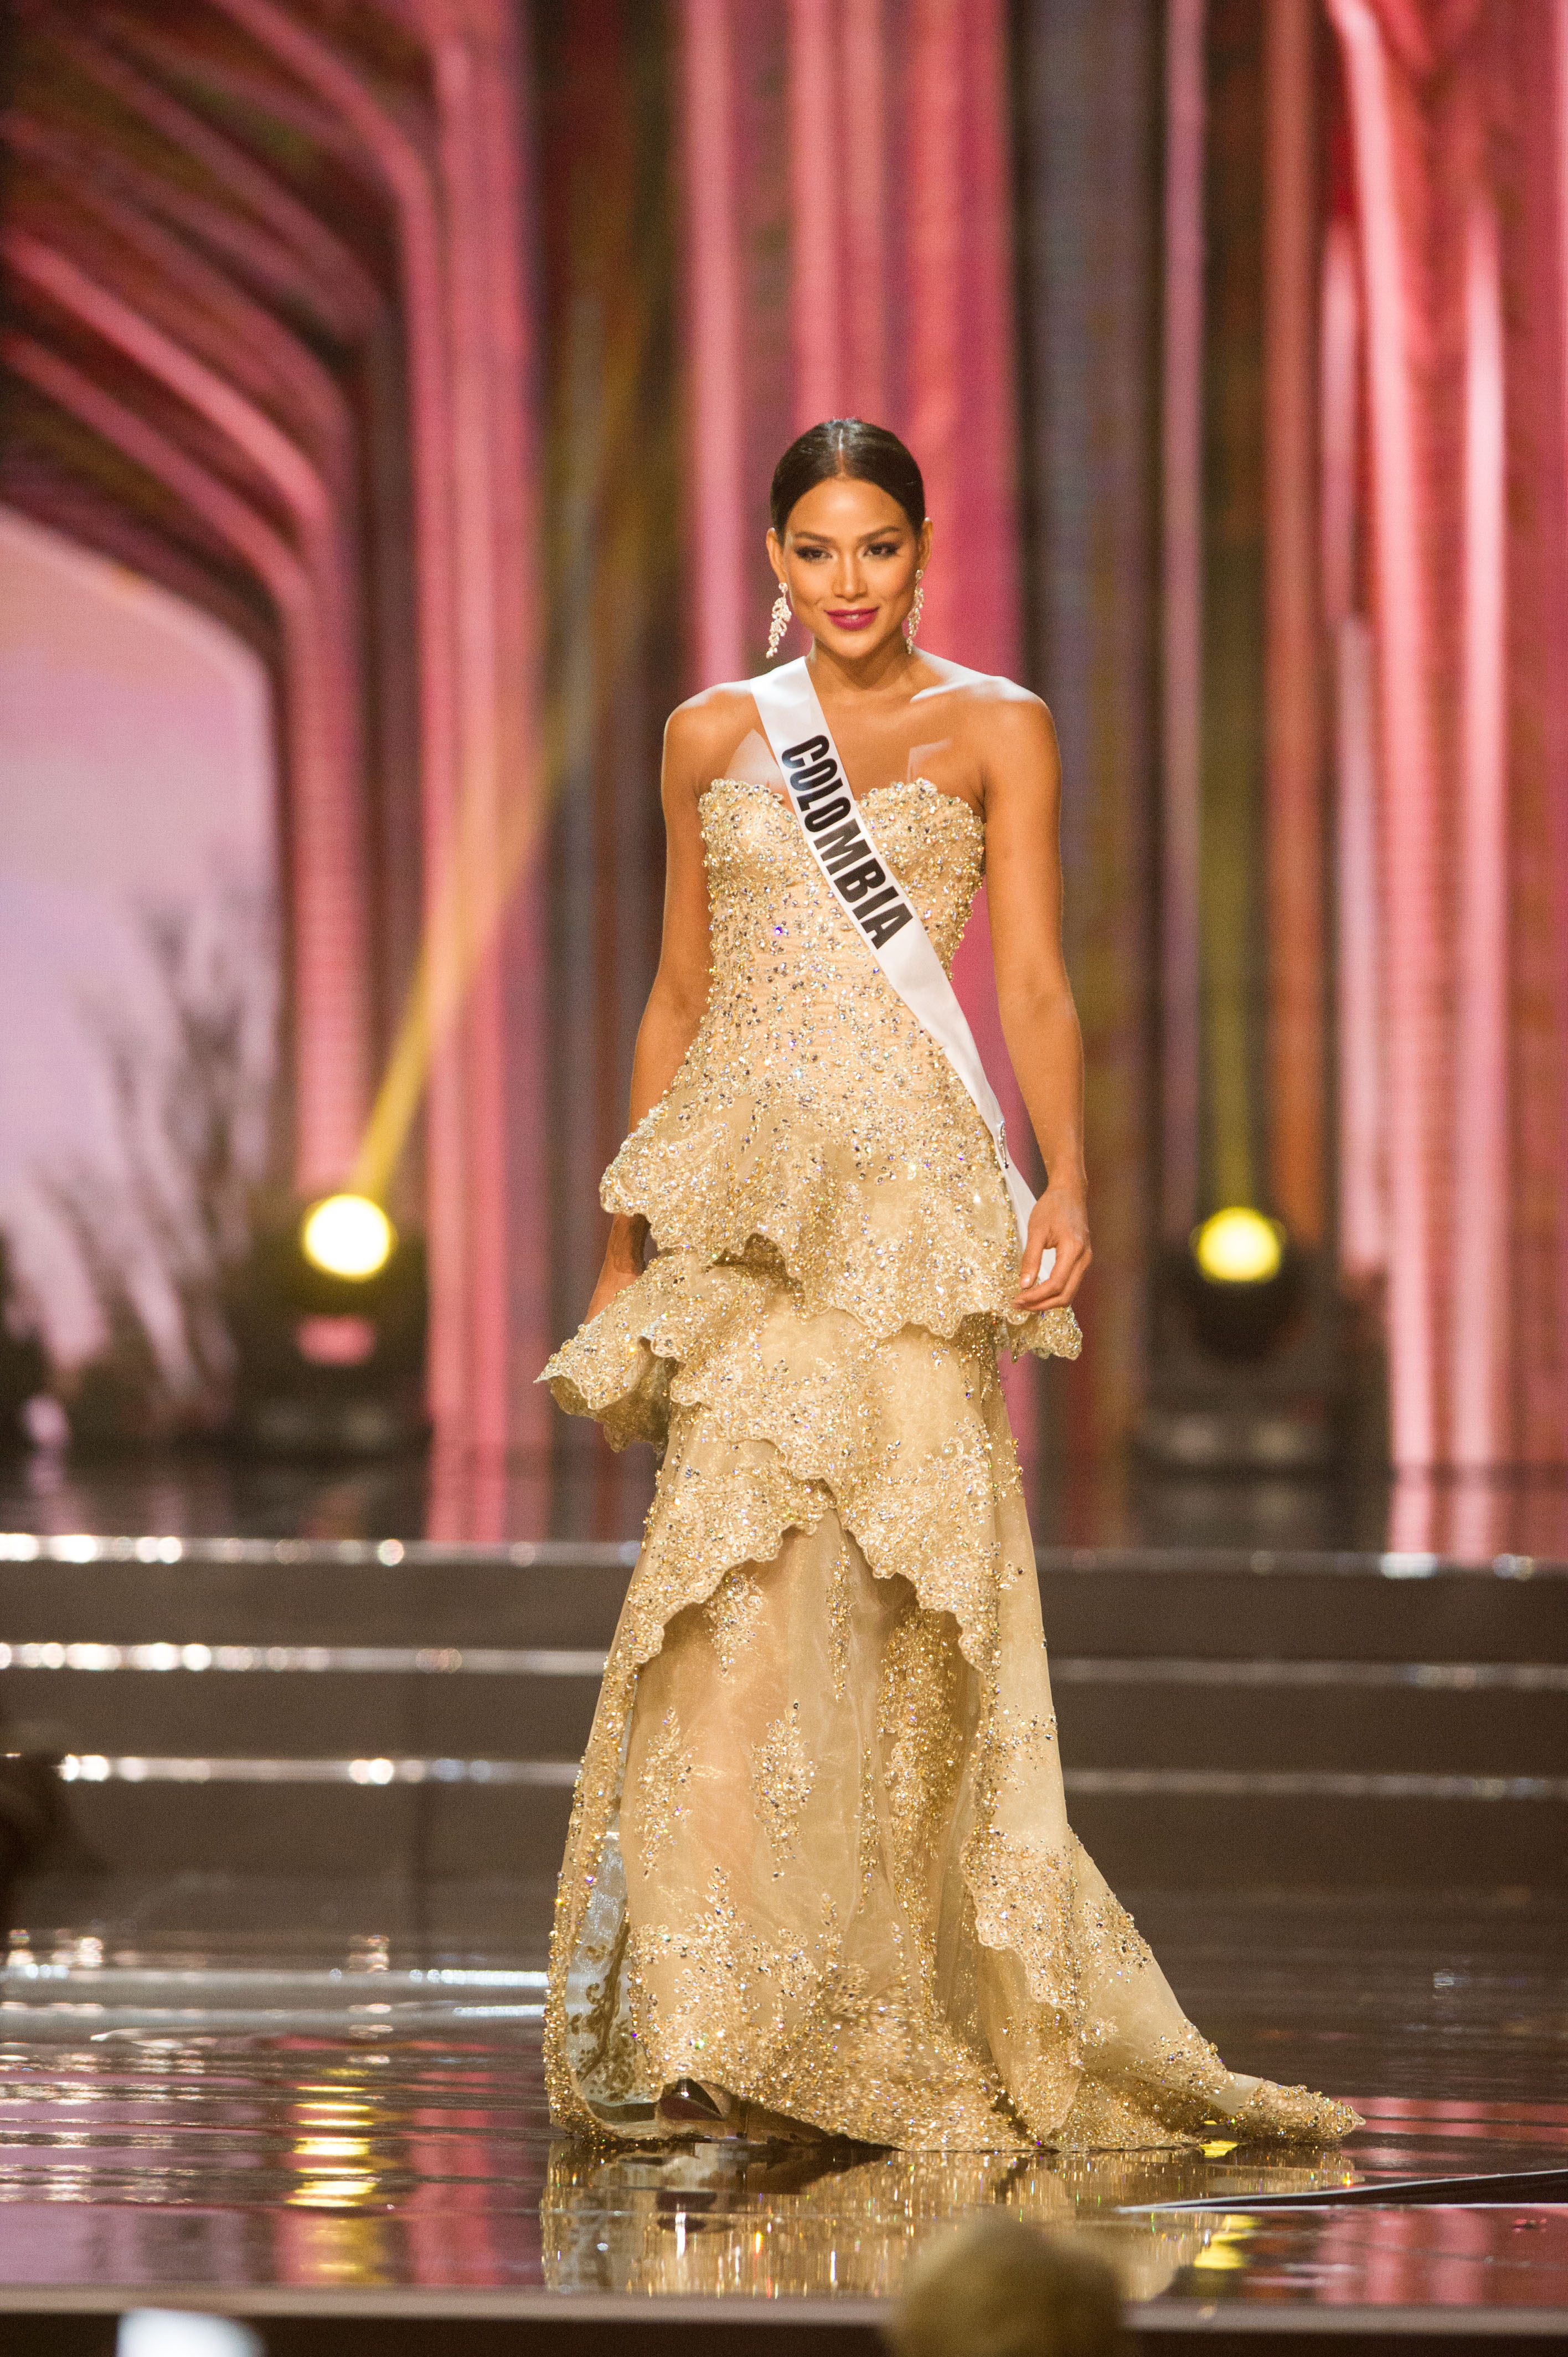 Andrea Tovar es Miss Colombia 2016 